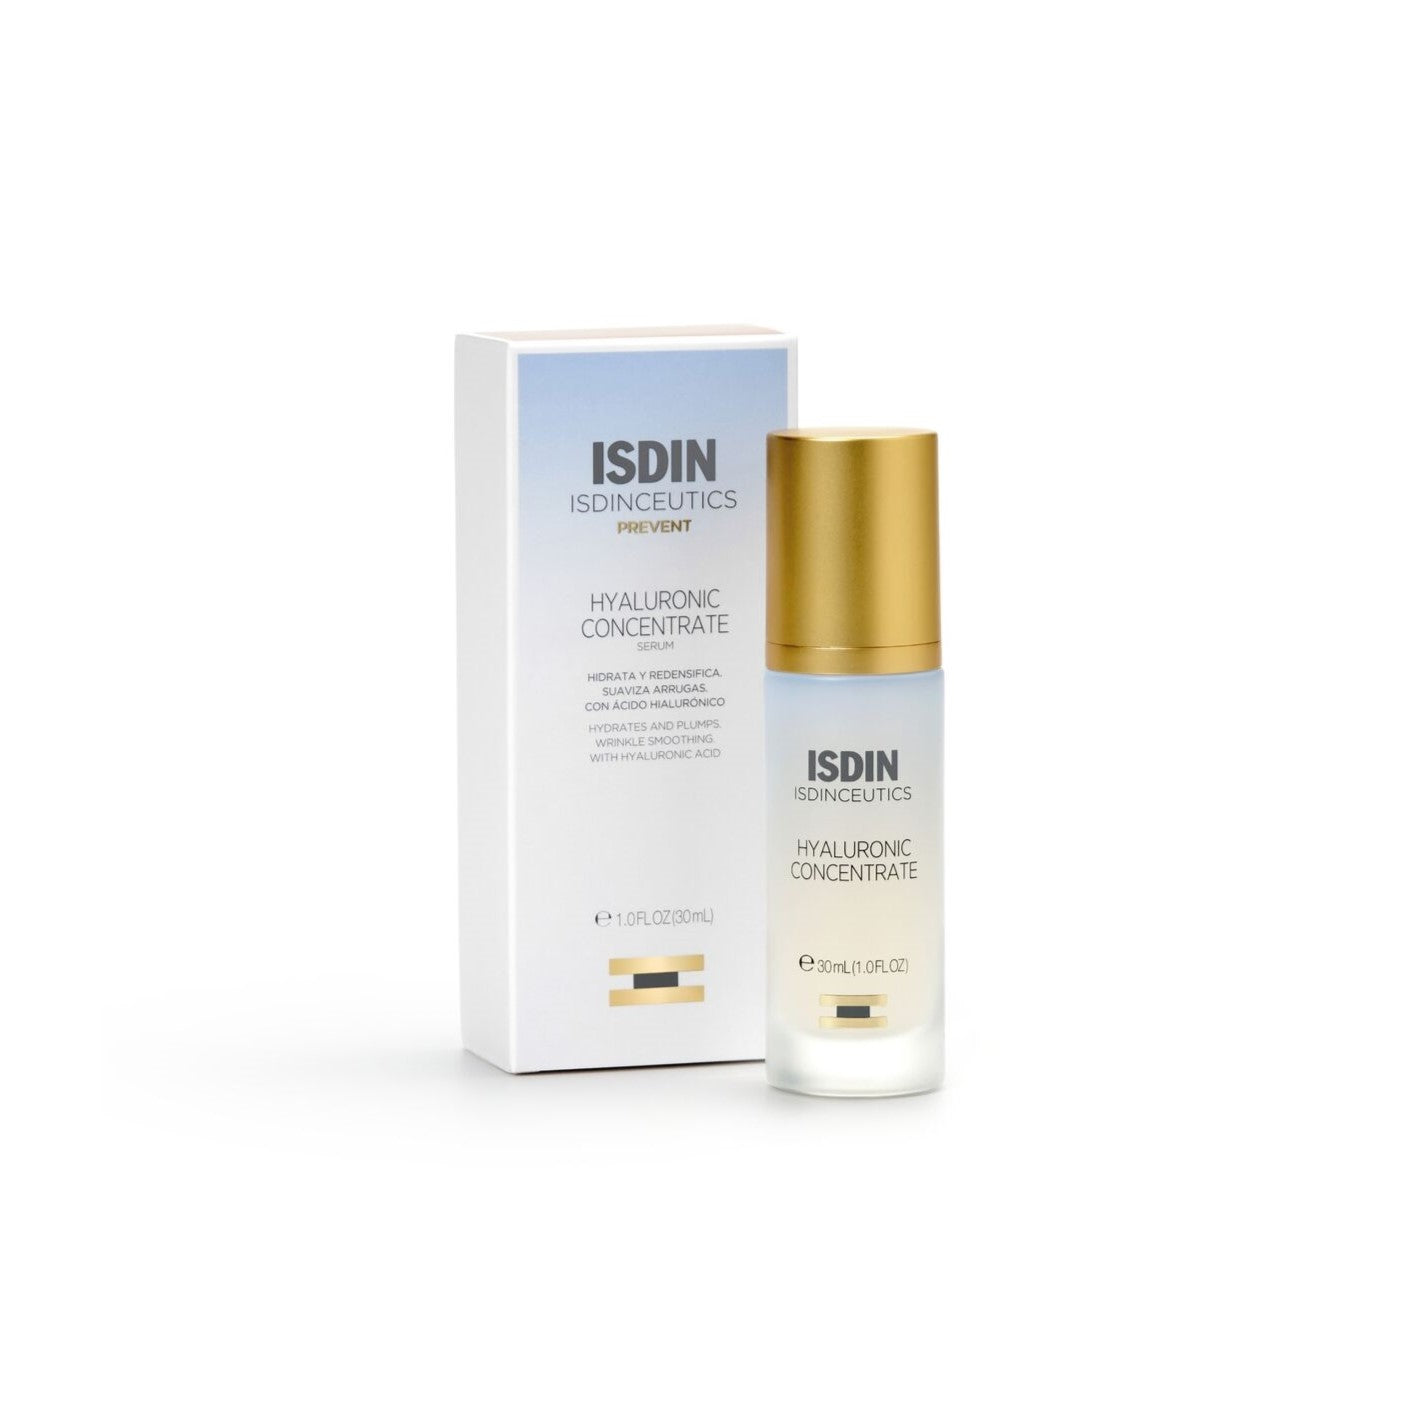 ISDIN Isdinceutics Hyaluronic Concentrate (30ml)